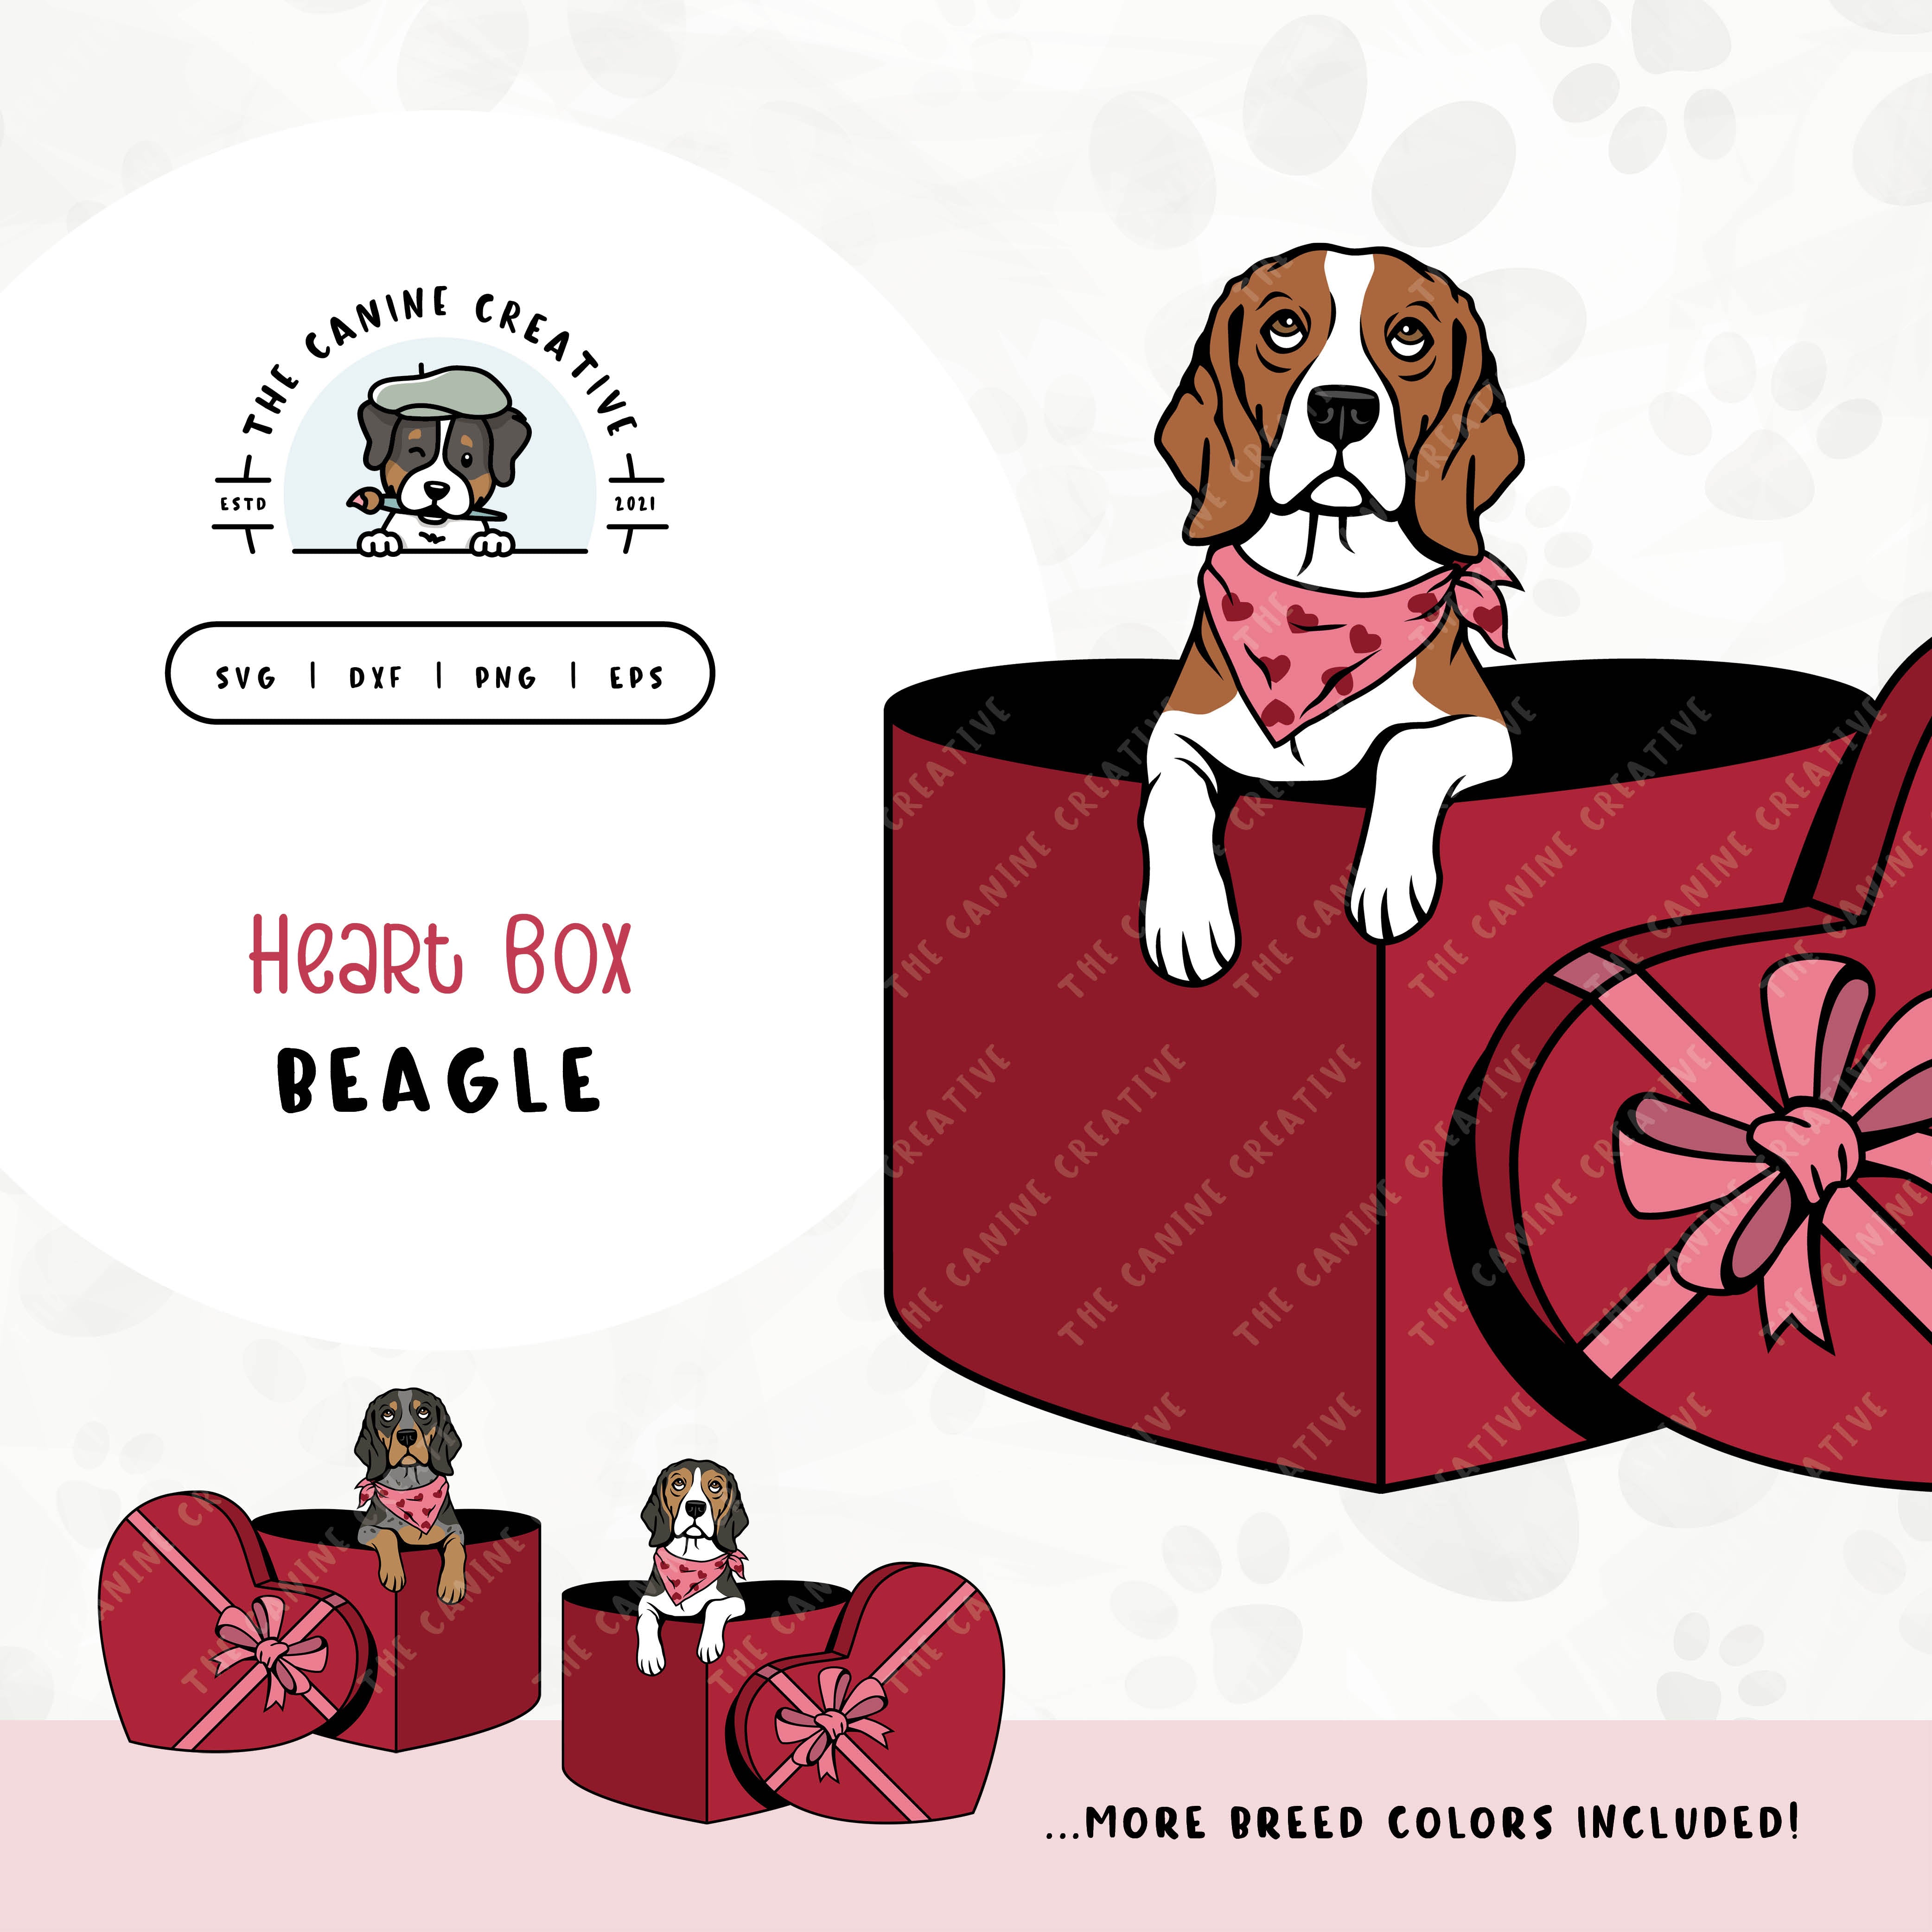 This charming Beagle illustration features a peeking dog in a heart-shaped box. File formats include: SVG, DXF, PNG, and EPS.